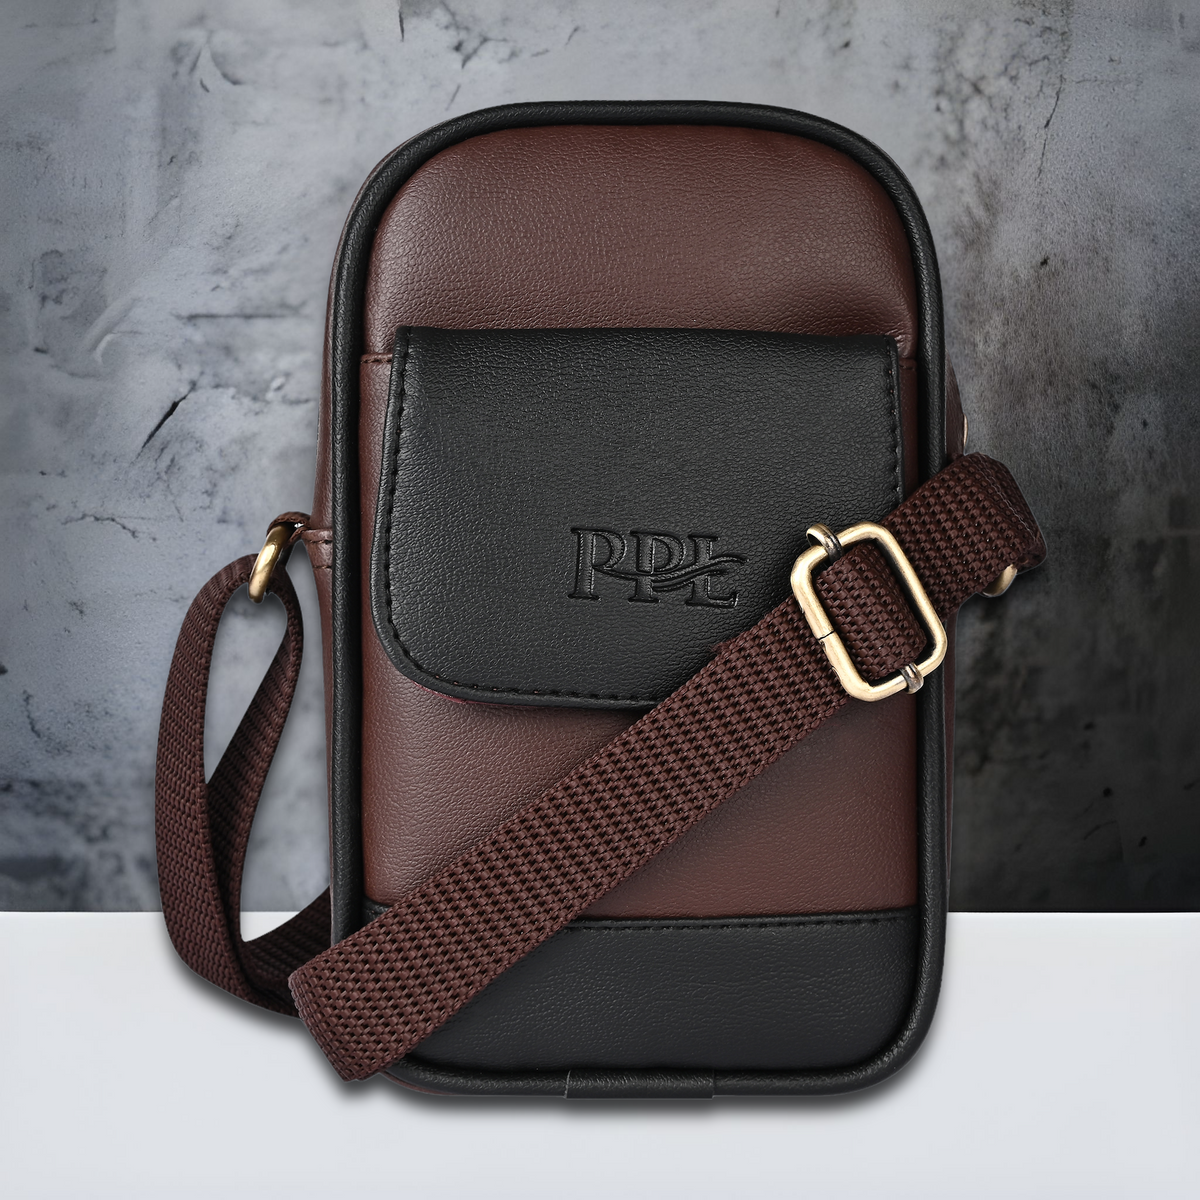 Classic Brown Dual Tone Tokyo Mobile Sling Bag For Men and Women